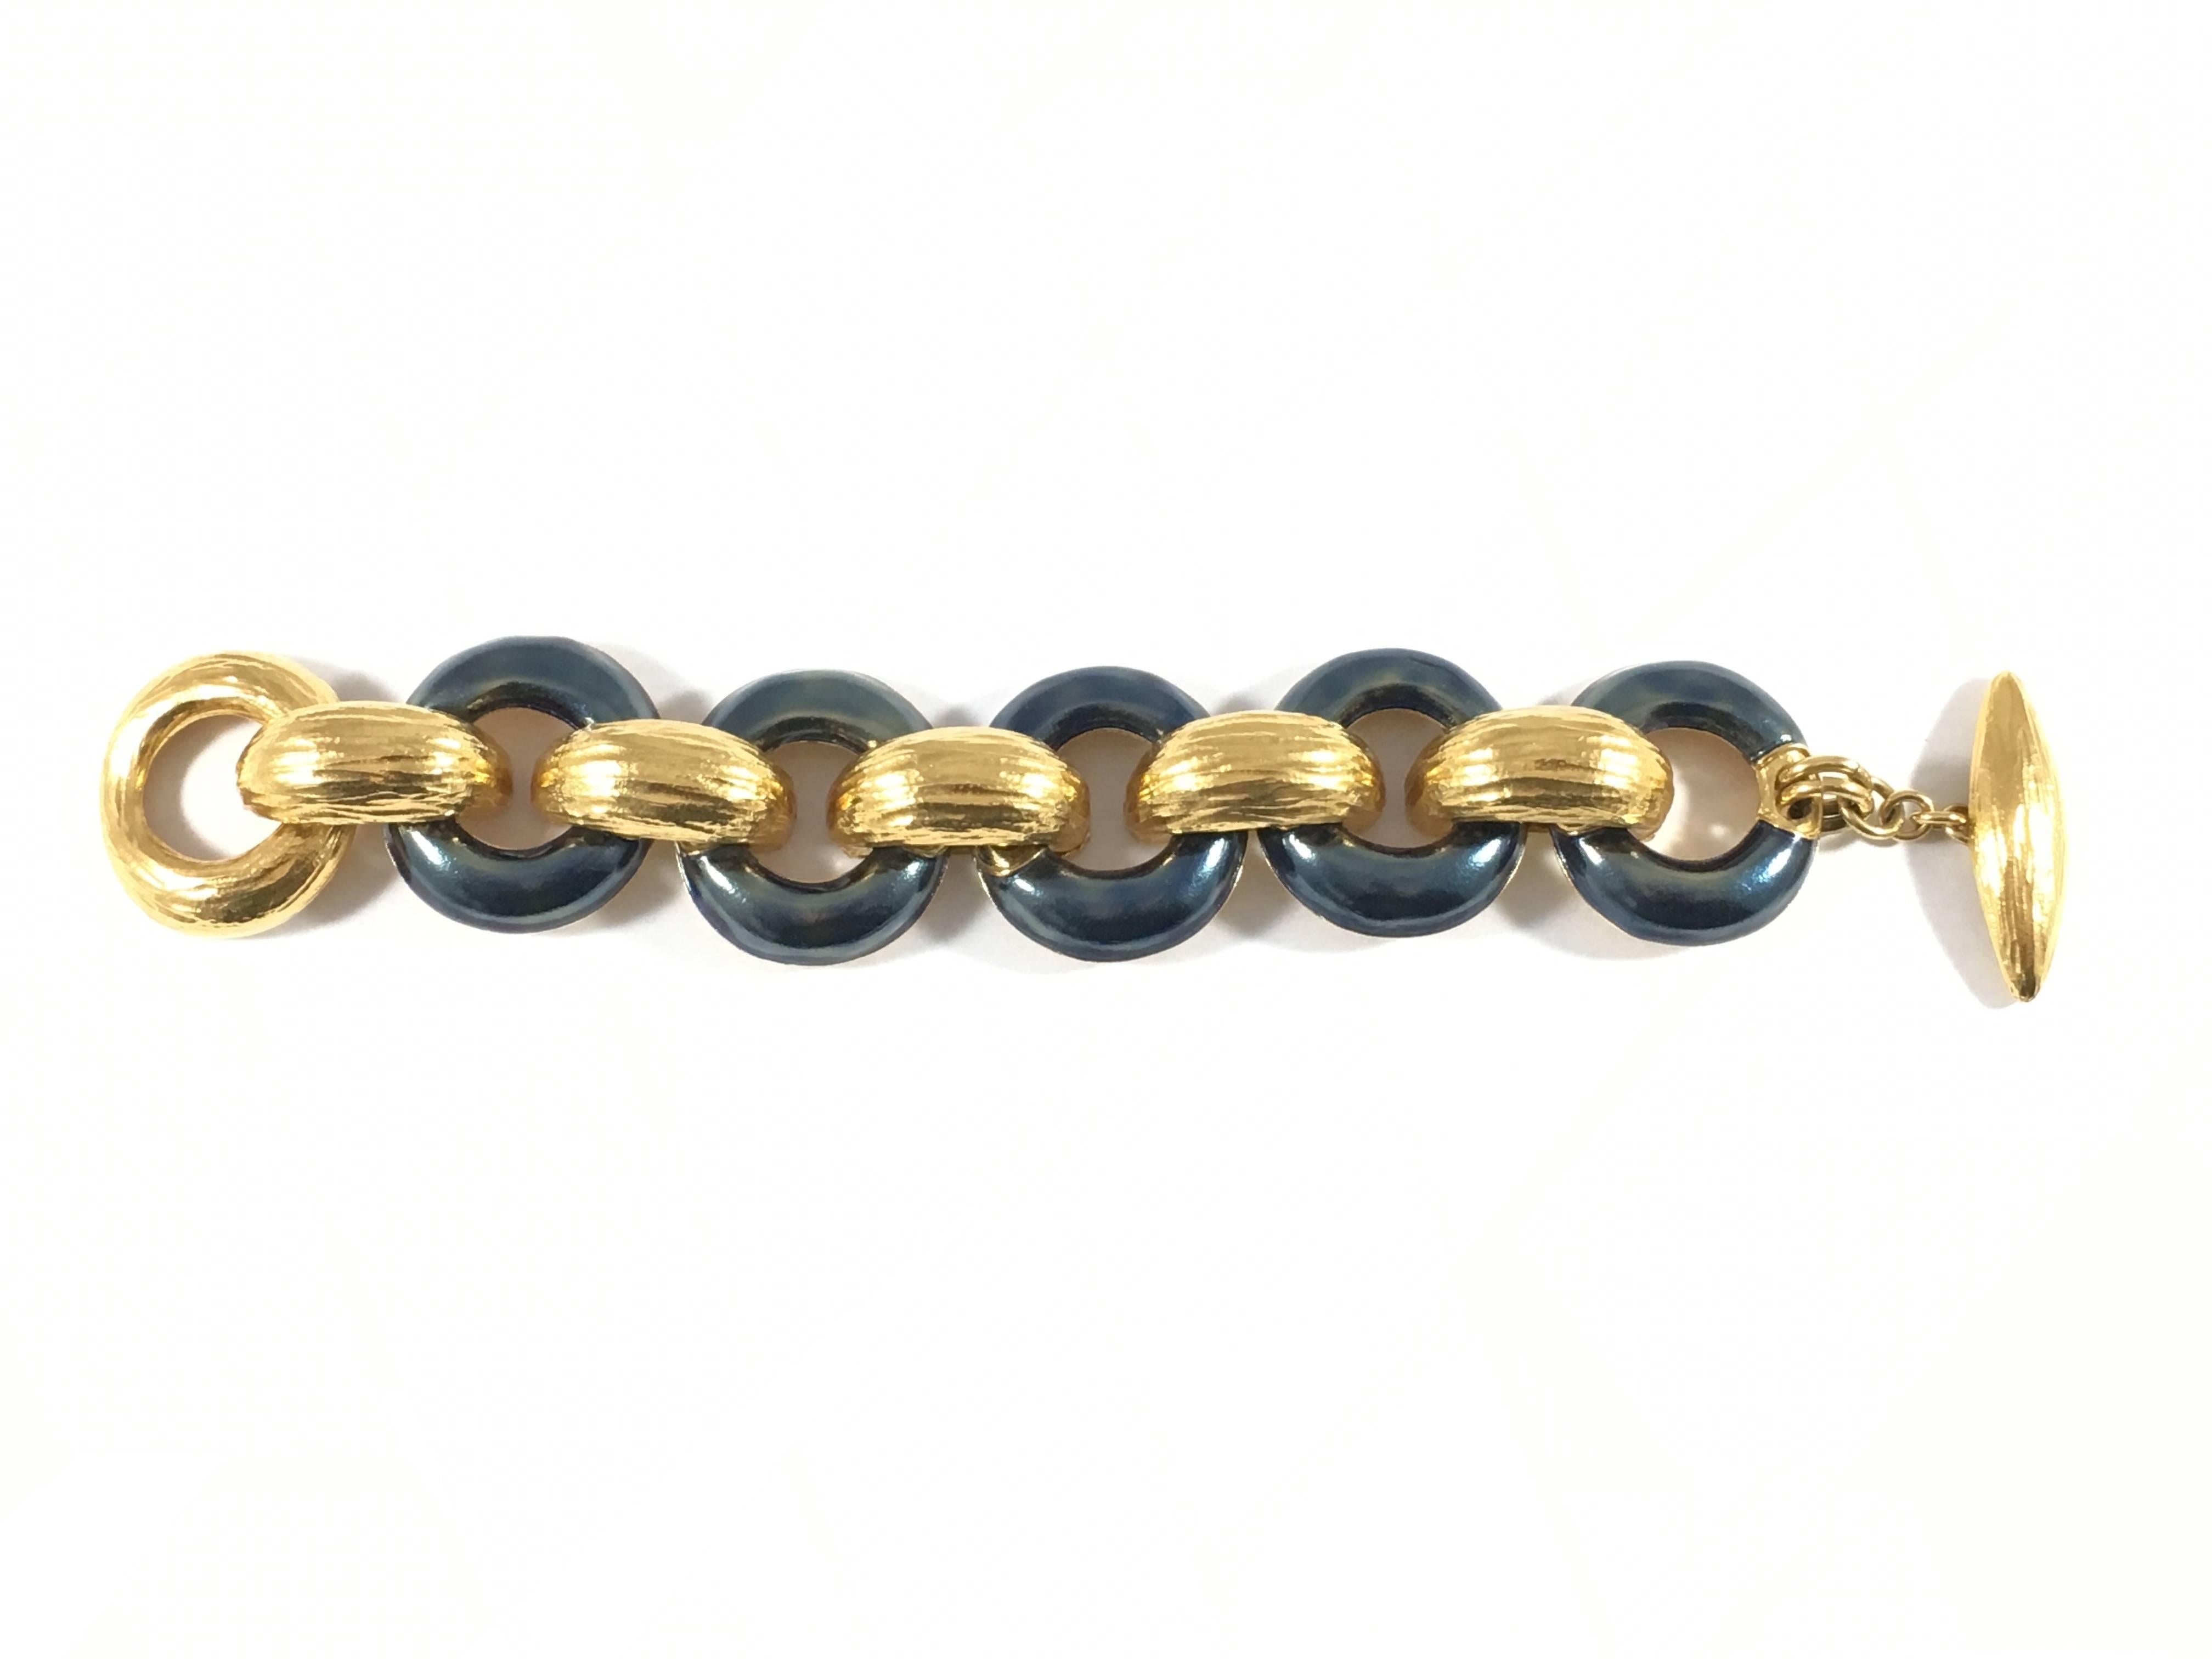 This beautiful 1980s bracelet is from Yves Saint Laurent's Rive Gauche line - the pret-a-porter line made especially for their Rive Gauche Boutiques. The bracelet is made up of heavy goldtone metal links interspersed with links covered in a